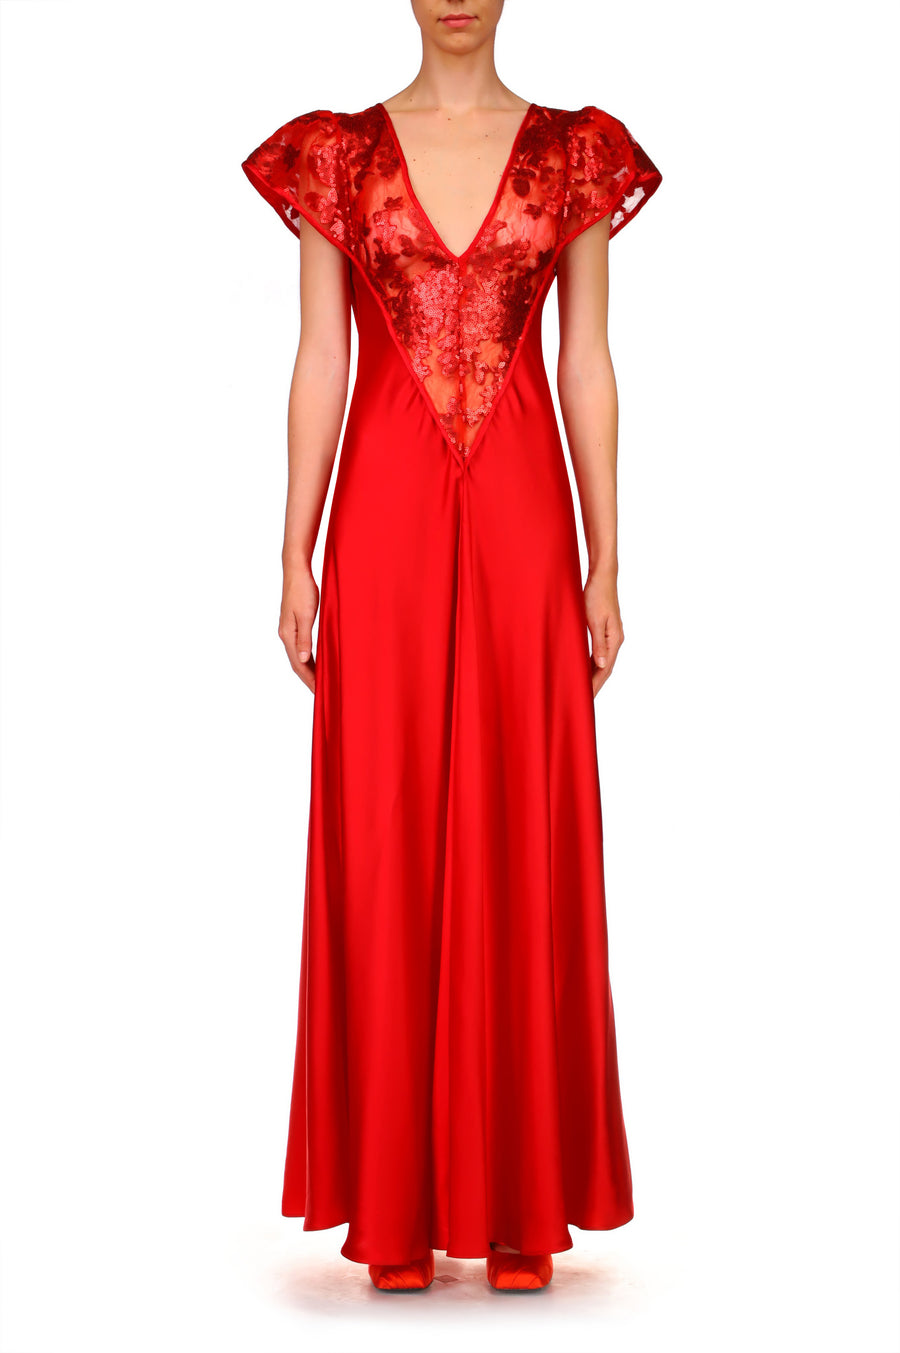 Red Sequin Mermaid Red Sparkly Prom Dress With Sweetheart Neckline And Lace  Detailing Plus Size Formal Evening Gown For Prom And Parties From Verycute,  $54.42 | DHgate.Com